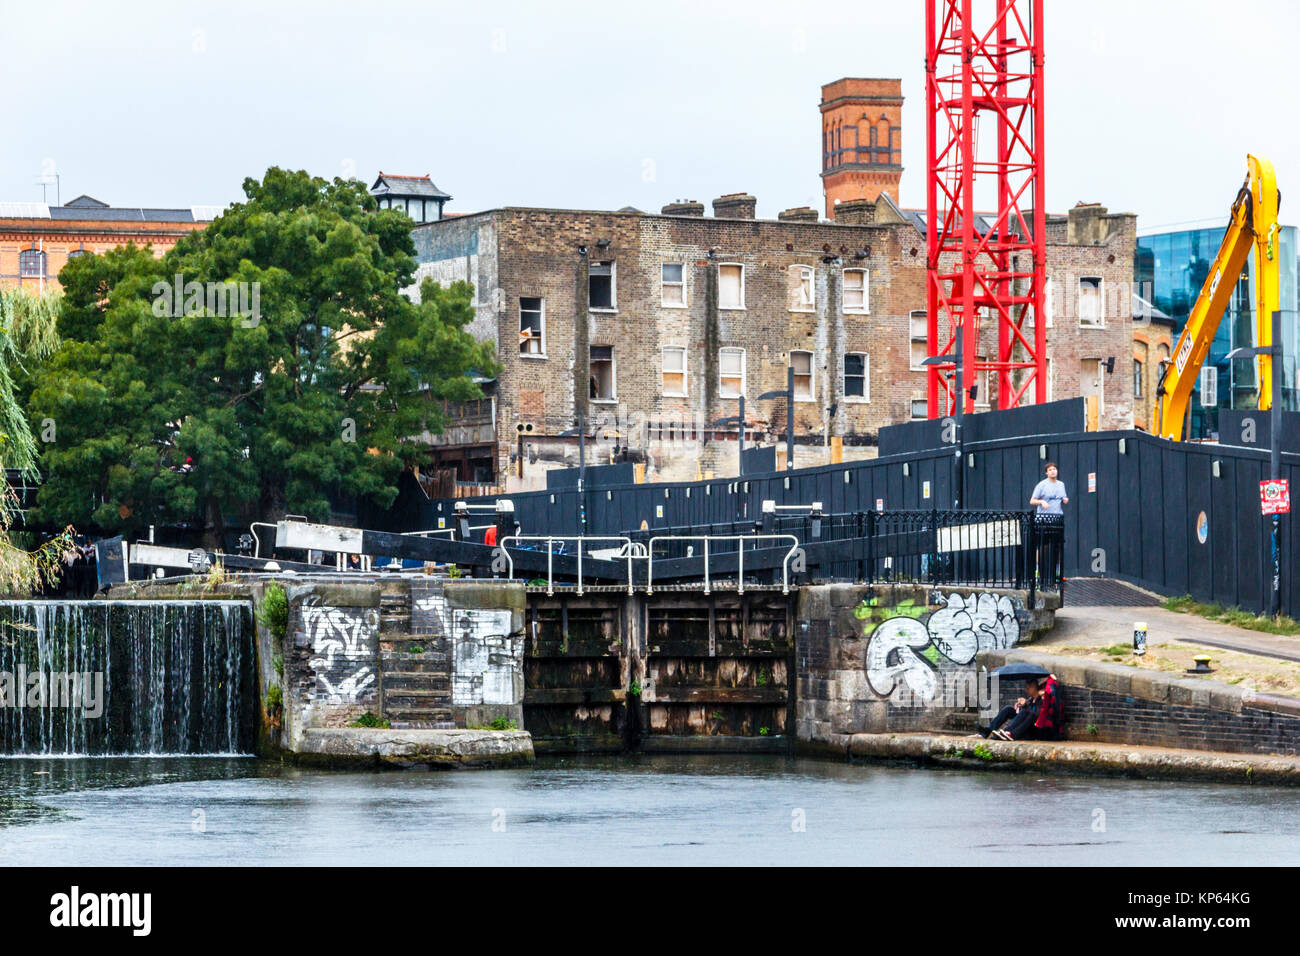 Apartments in a converted warehouses, Regent's Canal, Camden Town, London, UK Stock Photo